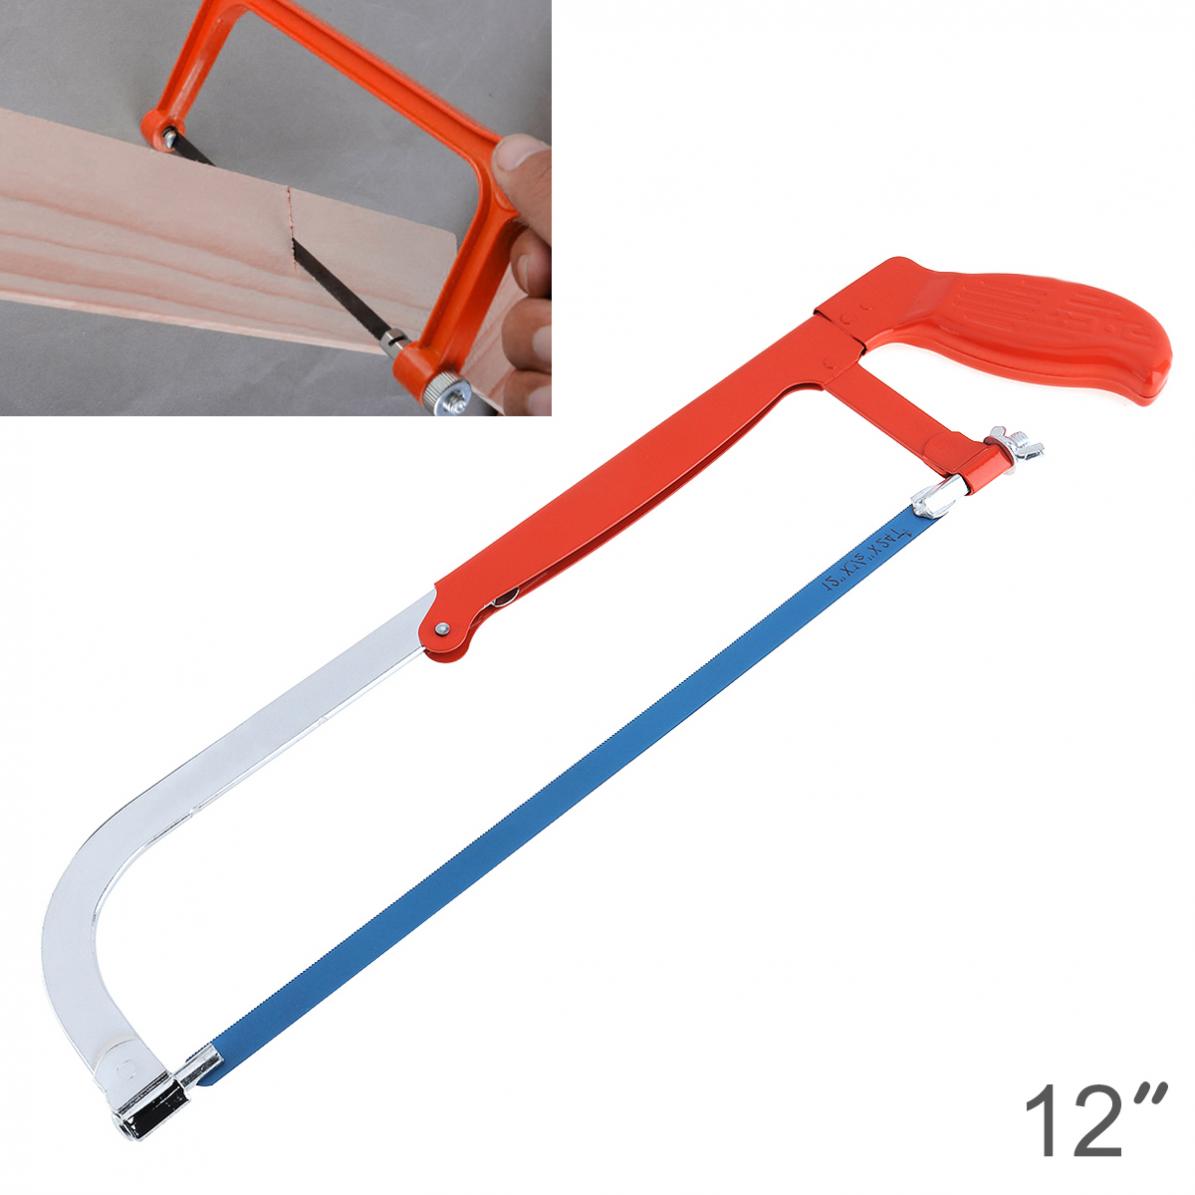 6 Inch Adjustable Hacksaw Saw with Aluminum Alloy Frame